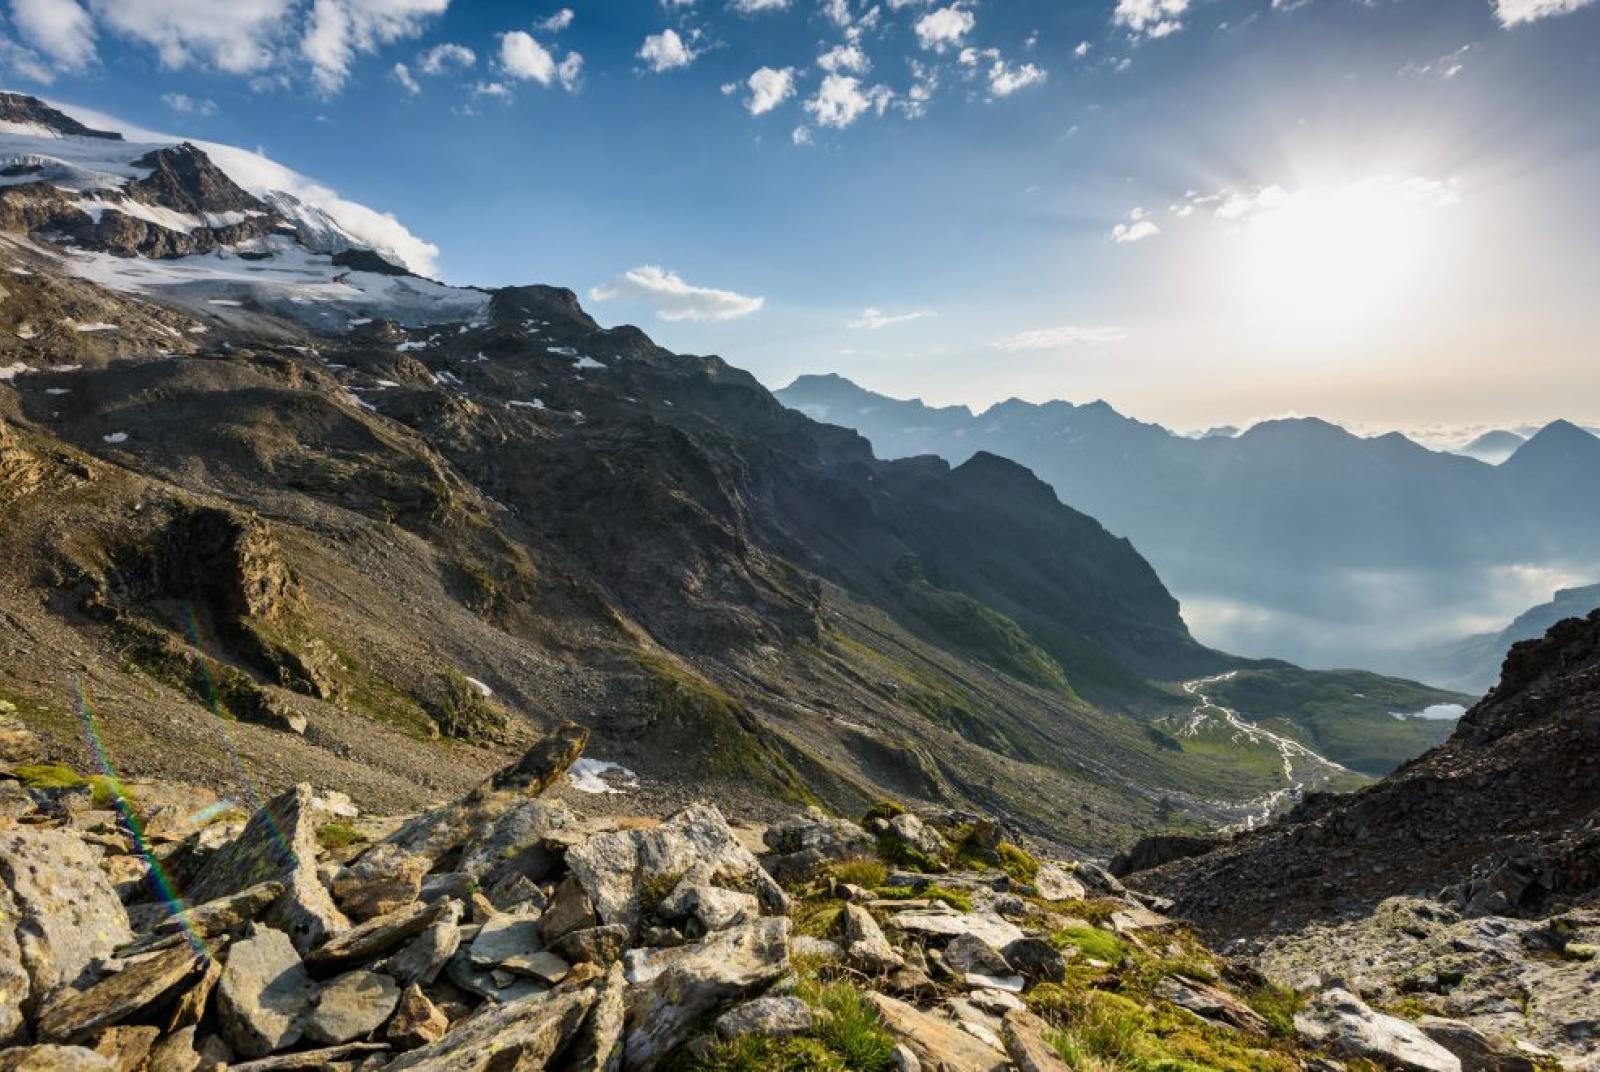 This summer, in Alagna, get your fill of excursions at high altitude!